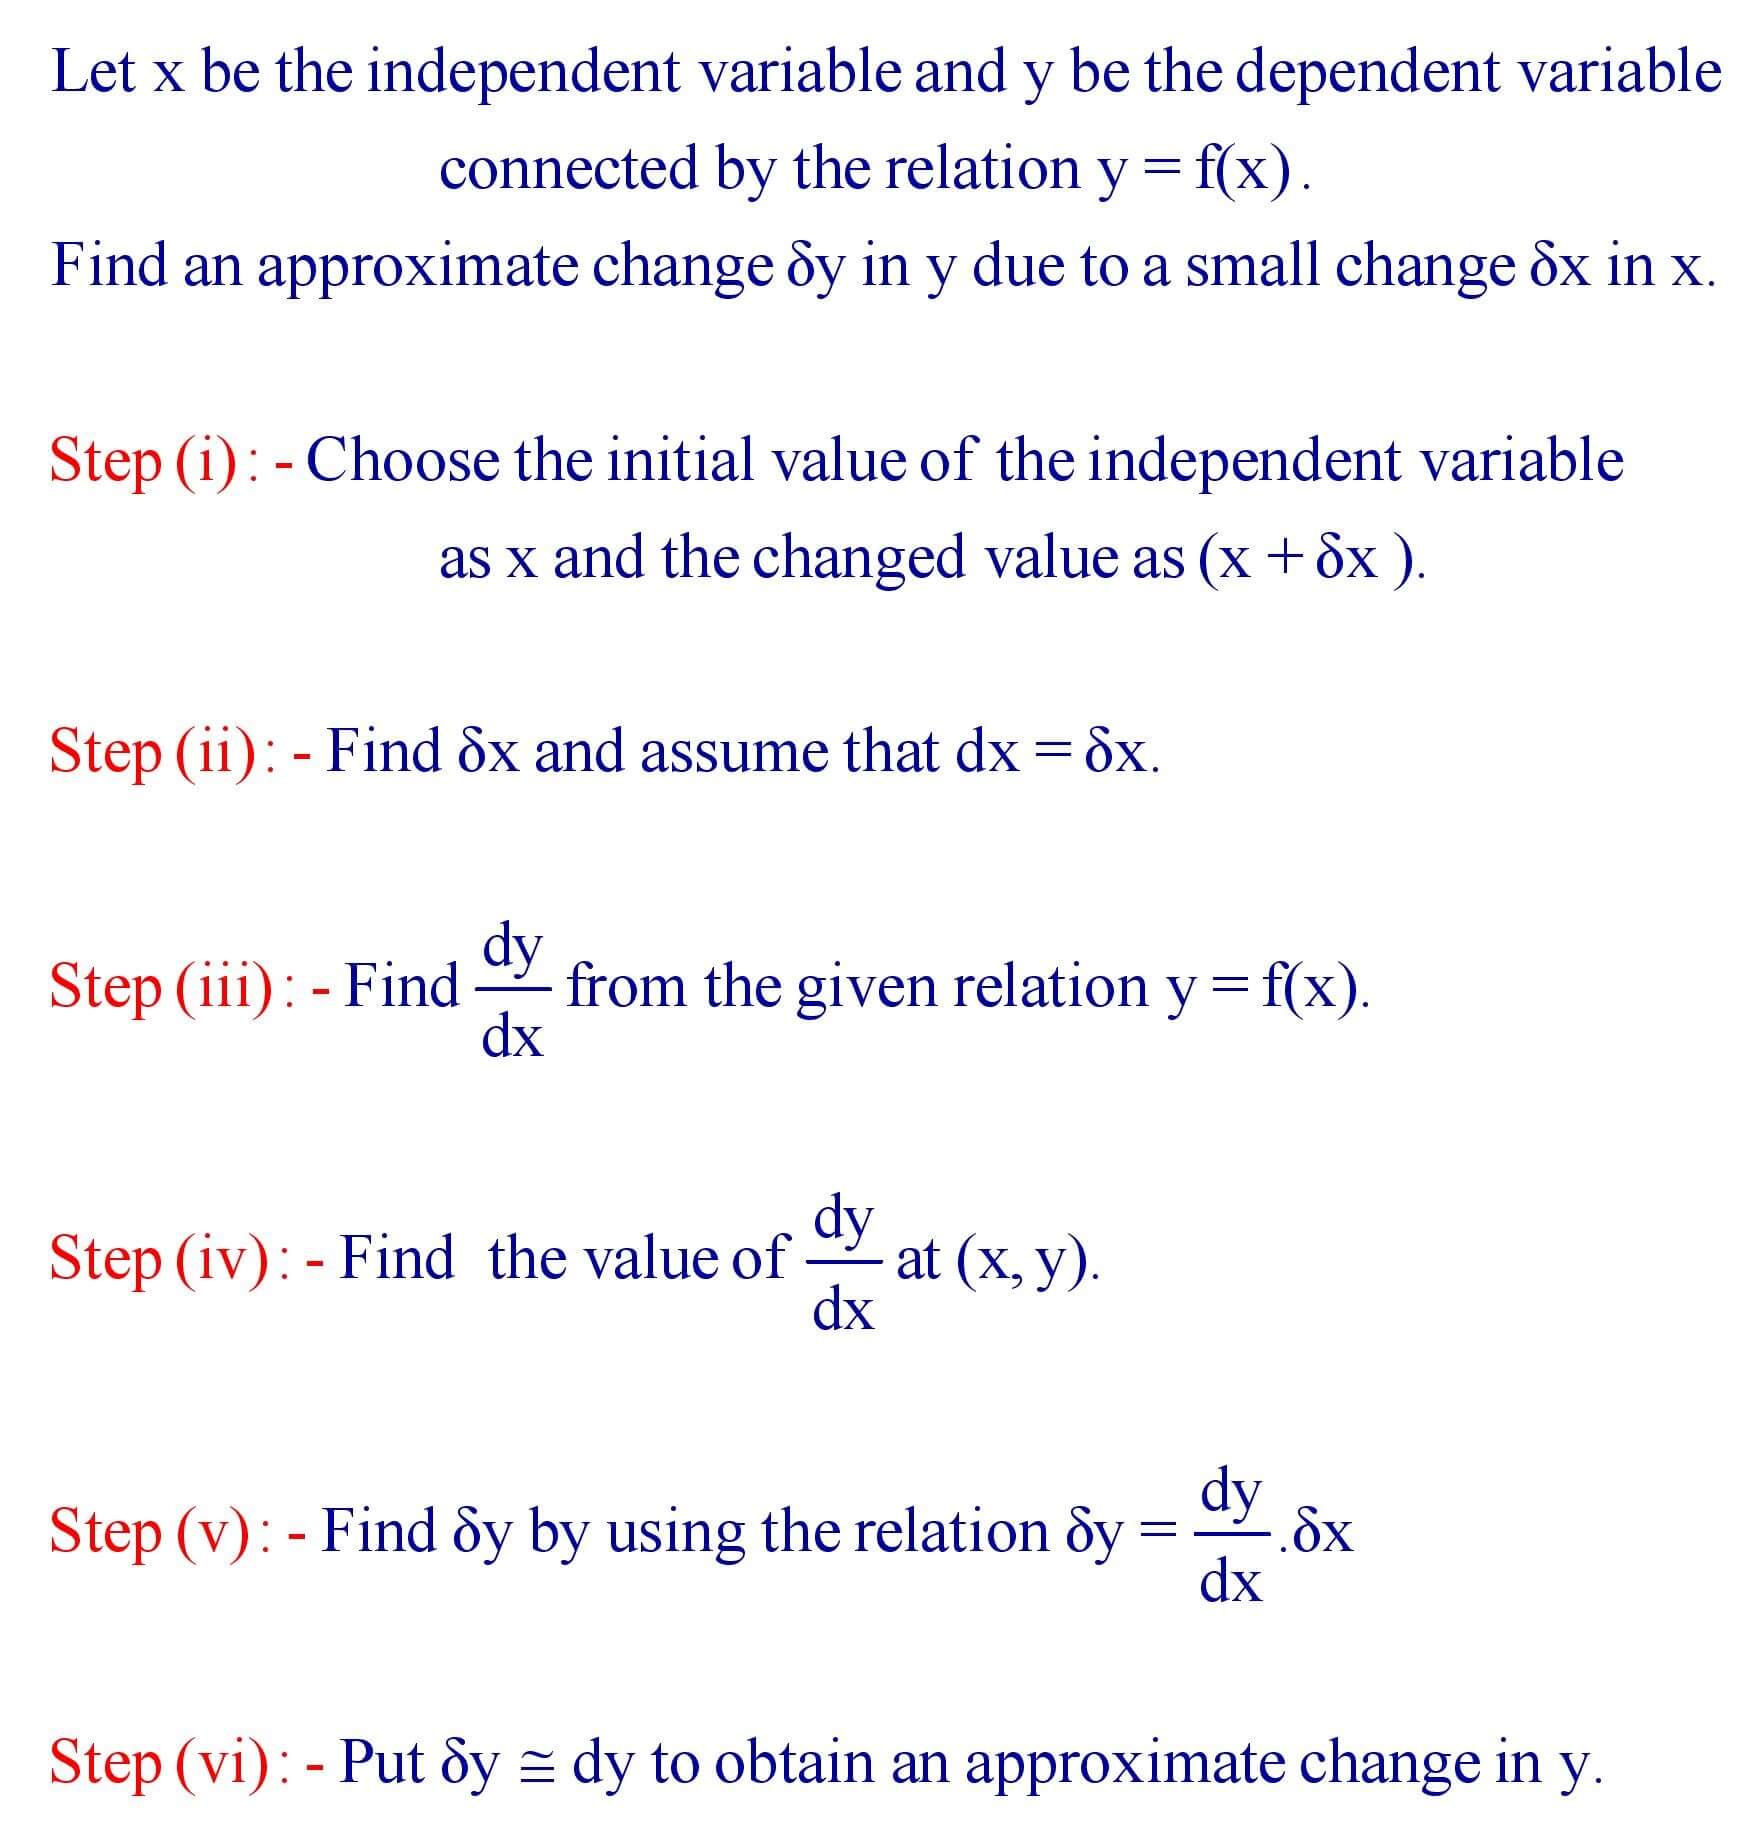 Find out the approximate change in the dependent variable corresponding to a small change in the independent variable.